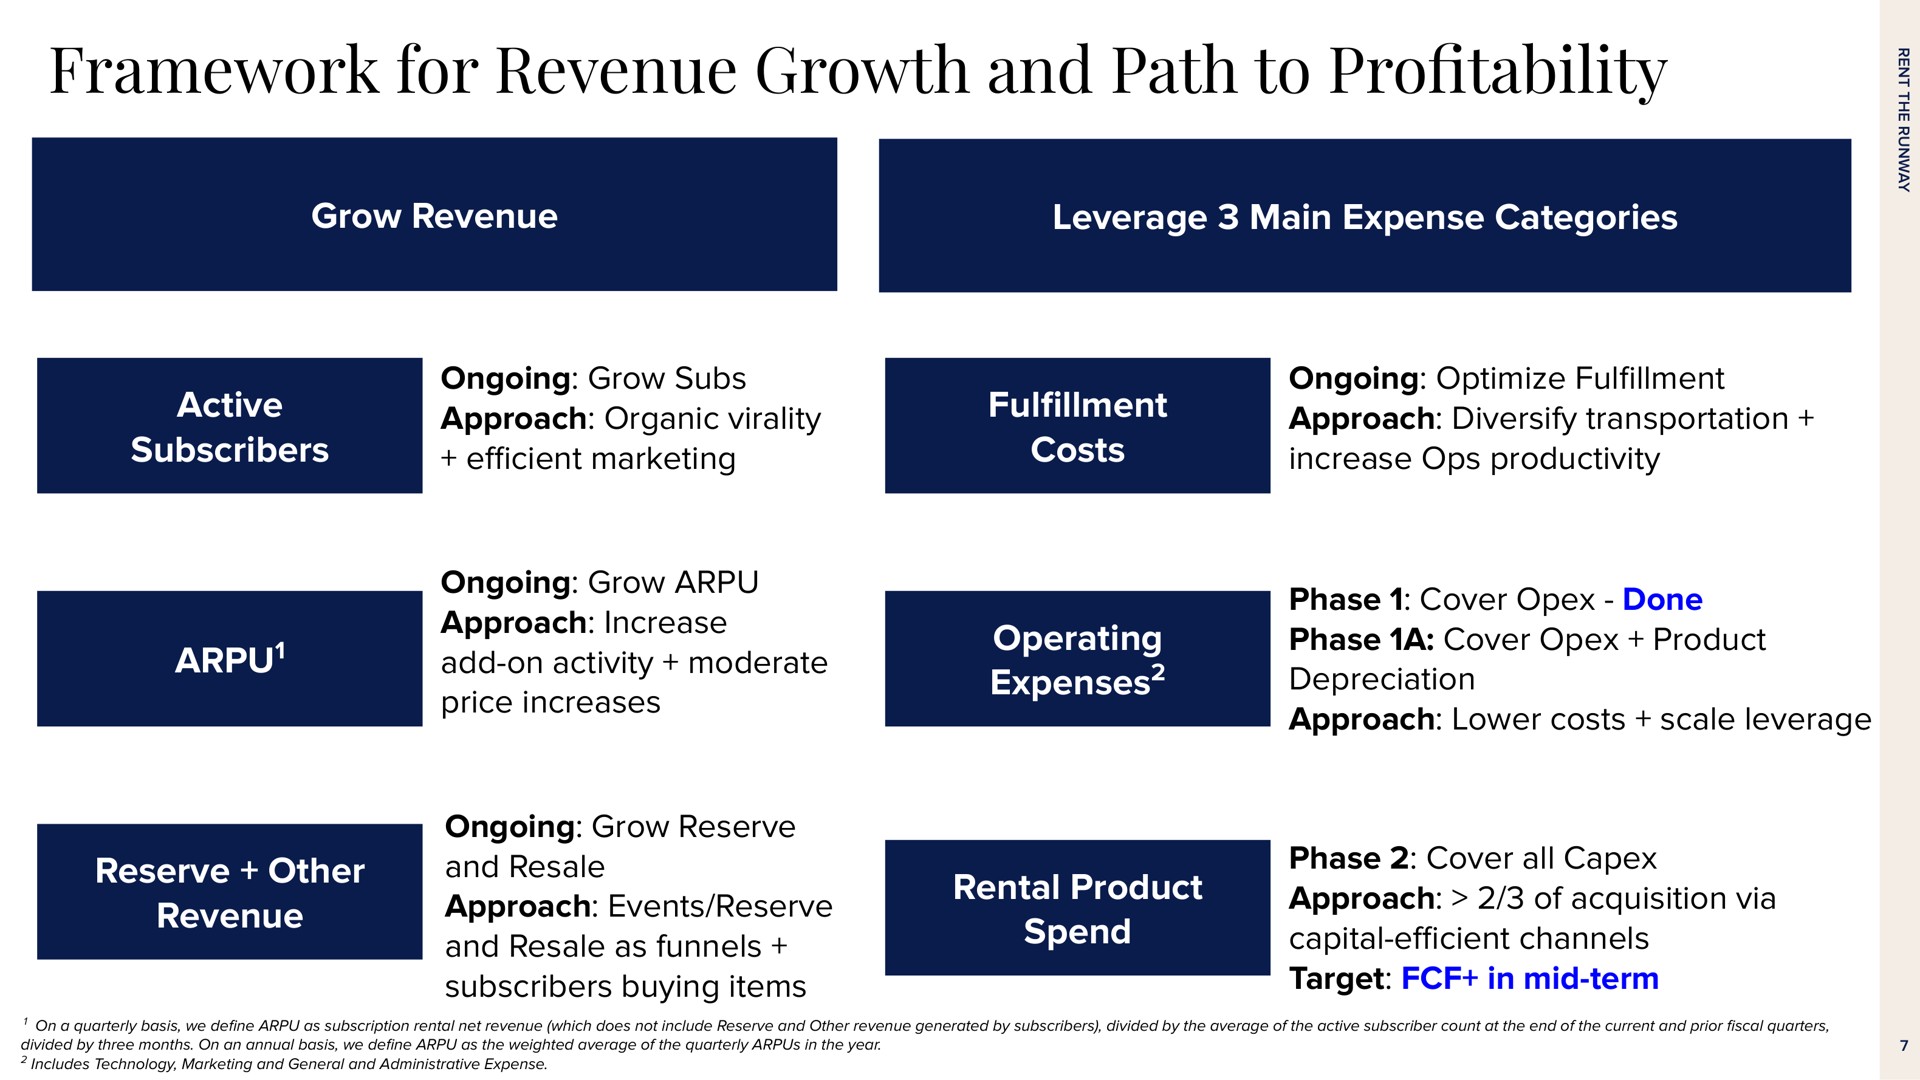 framework for revenue growth and path to pro grow revenue leverage main expense categories active subscribers ongoing grow subs approach organic marketing costs ongoing optimize approach diversify transportation increase productivity ongoing grow approach increase add on activity moderate price increases operating expenses phase cover done phase a cover product depreciation approach lower costs scale leverage reserve other revenue ongoing grow reserve and resale approach events reserve and resale as funnels subscribers buying items rental product spend phase cover all approach of acquisition via capital channels target in mid term profitability eyes | Rent The Runway